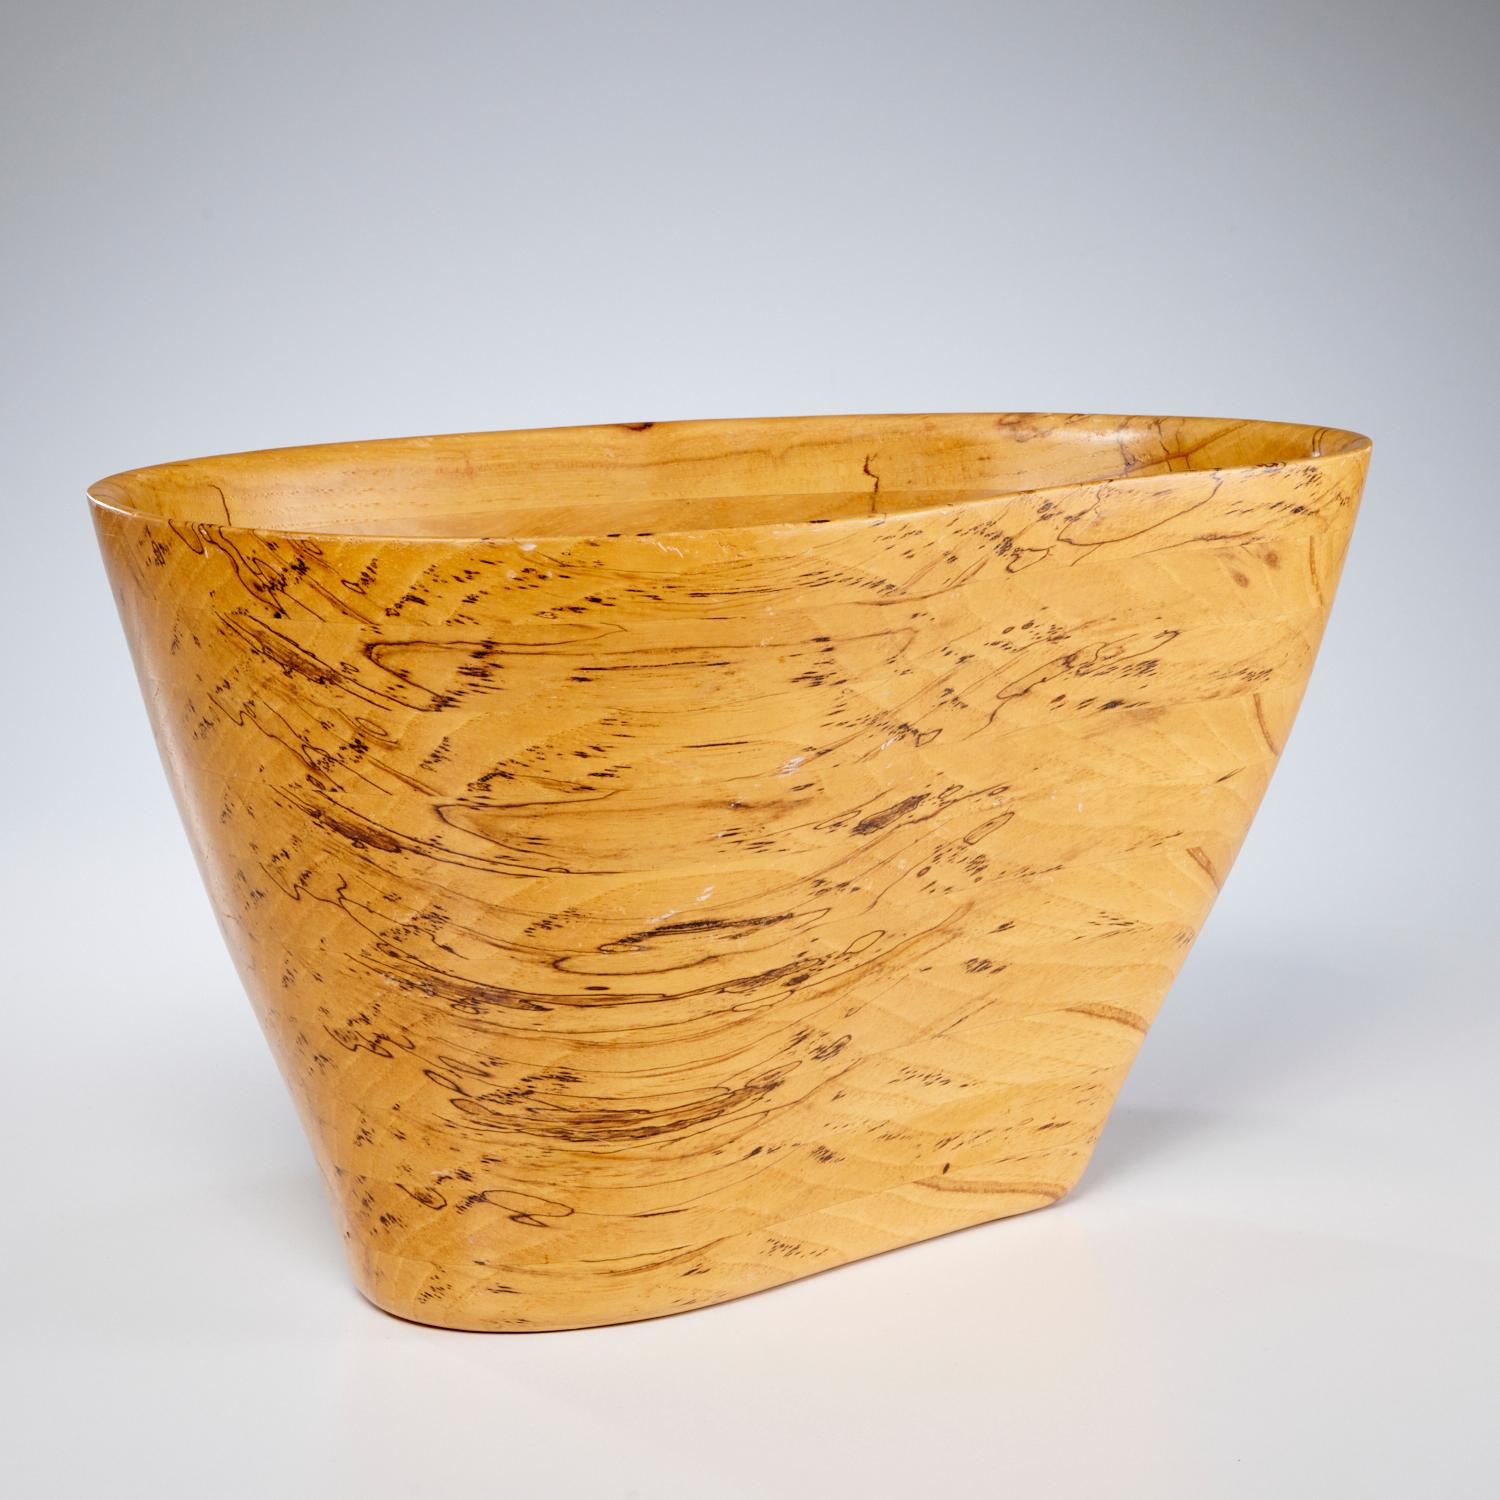 Organic Modern Large 2002 Peter Petrochko Signed Amorphic Bowl of Layered Hickory For Sale